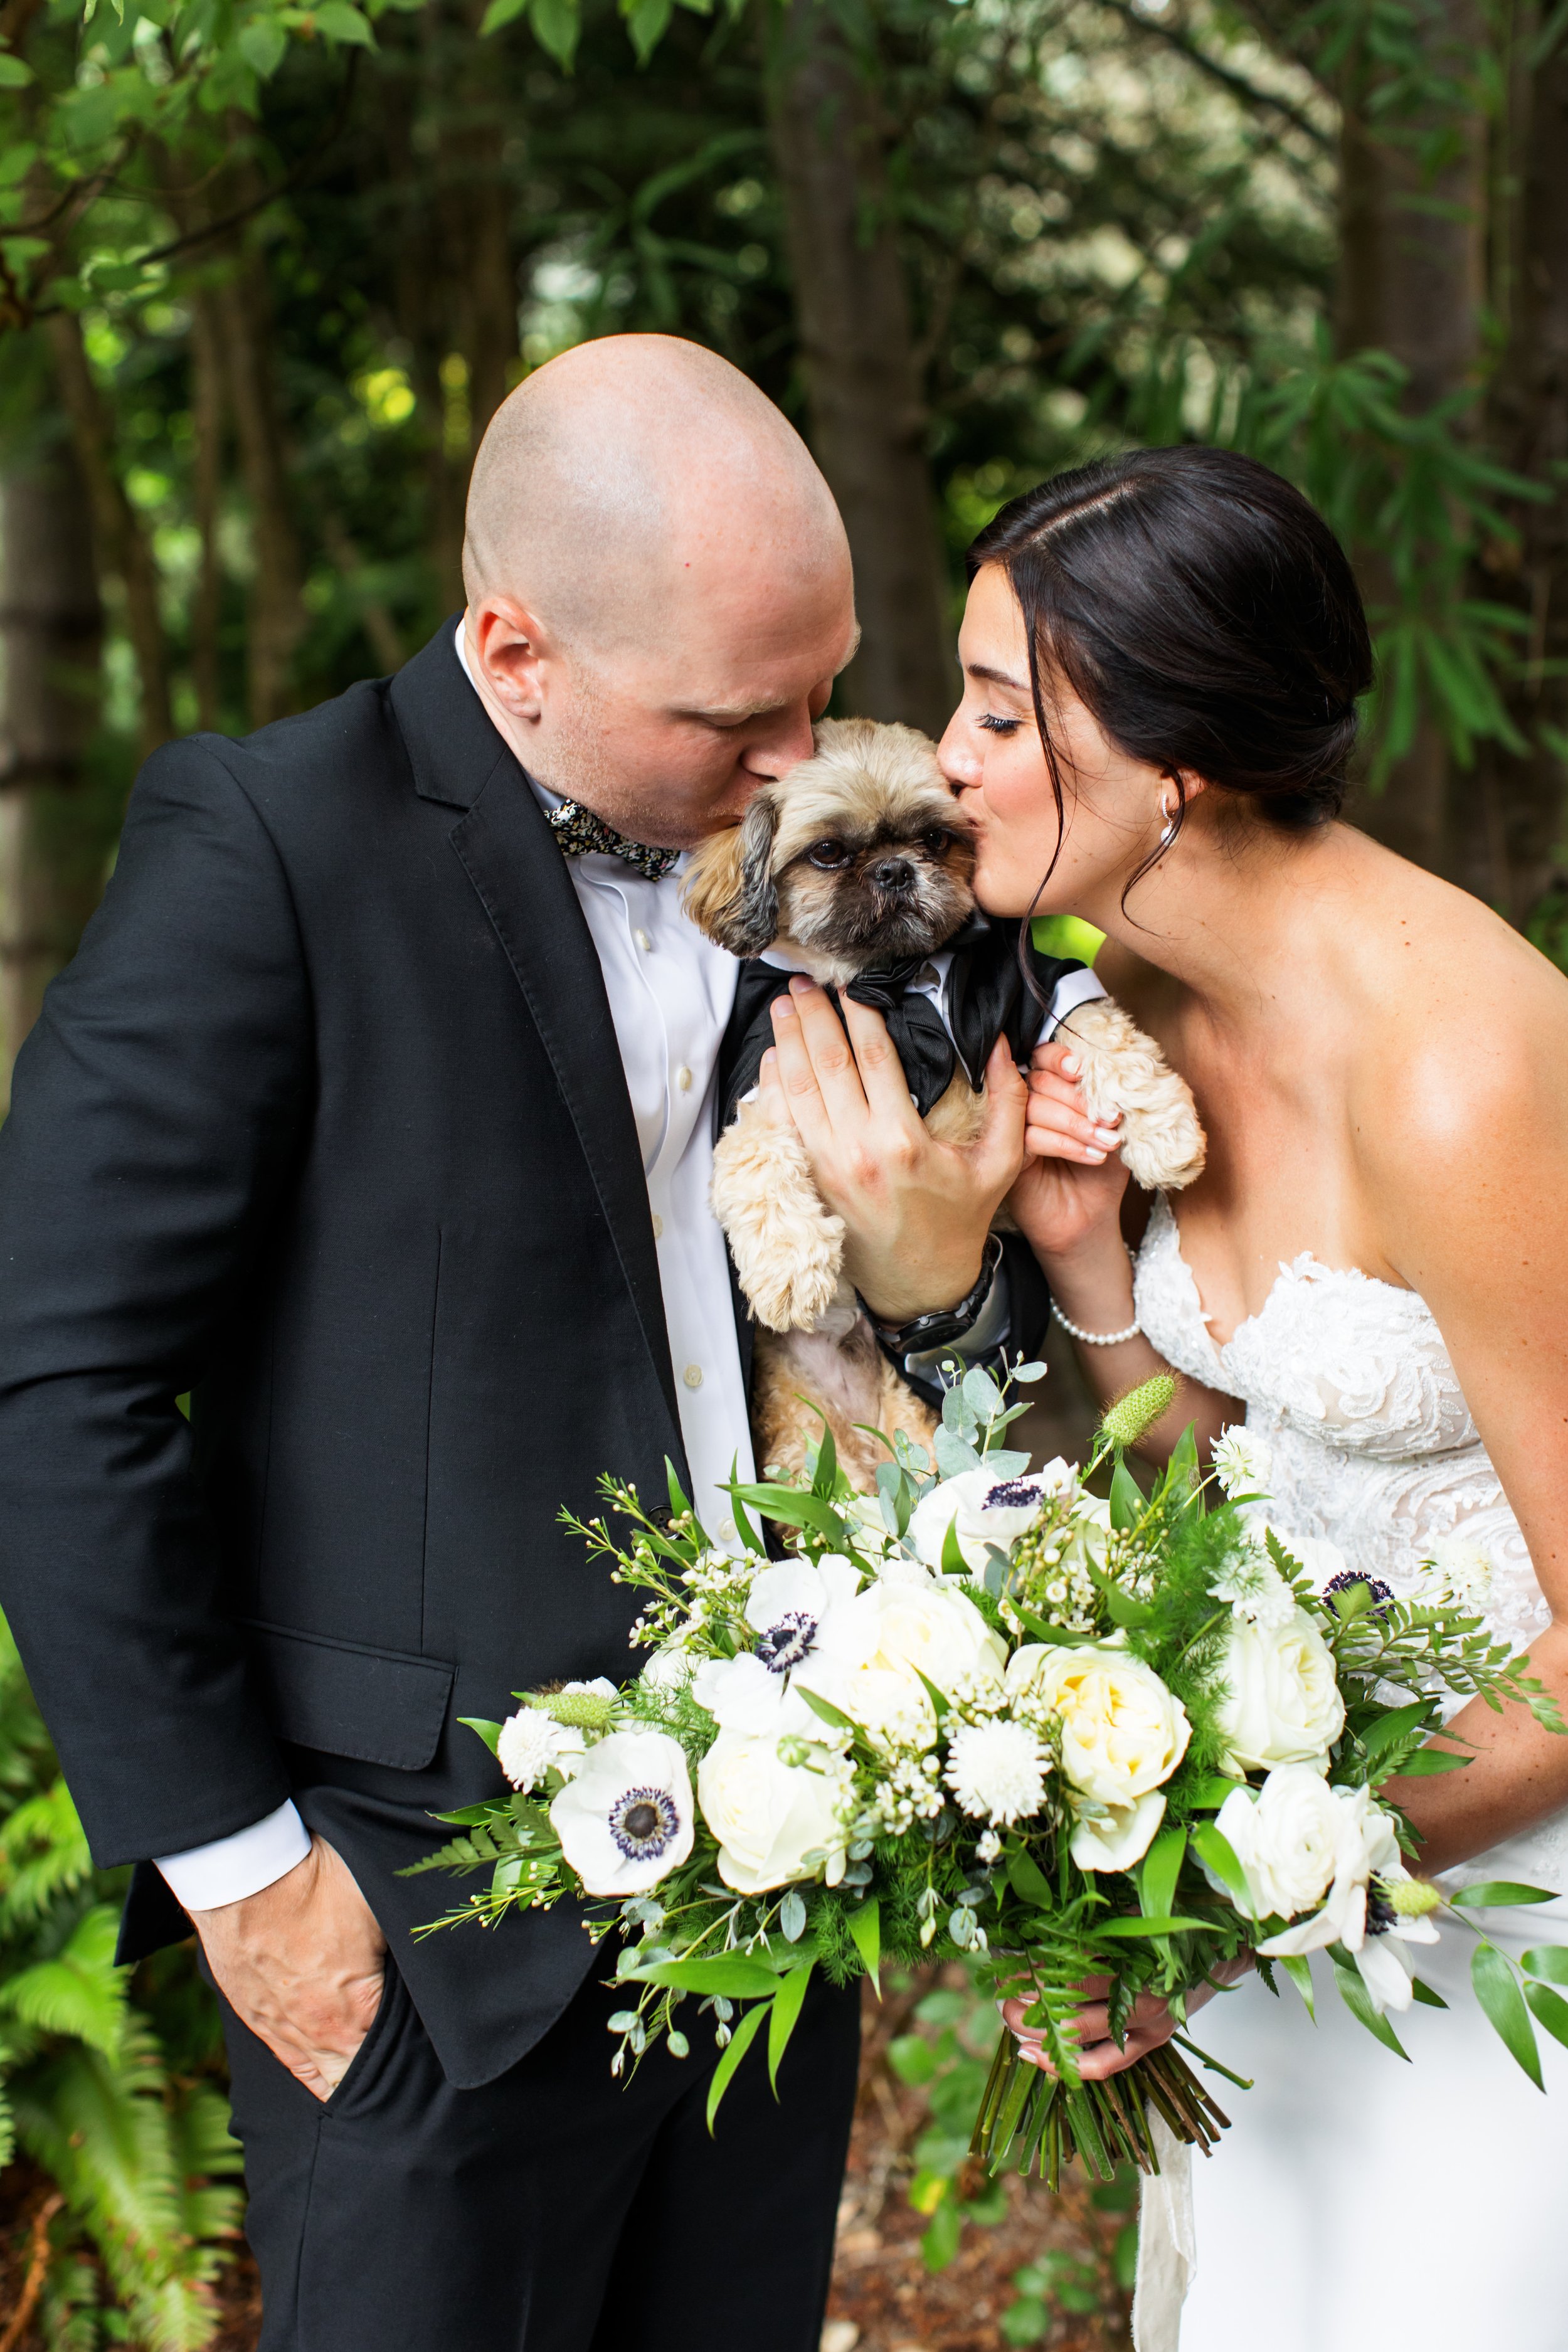 Greg + Jessica: And Then There Were Four – Kattch Weddings